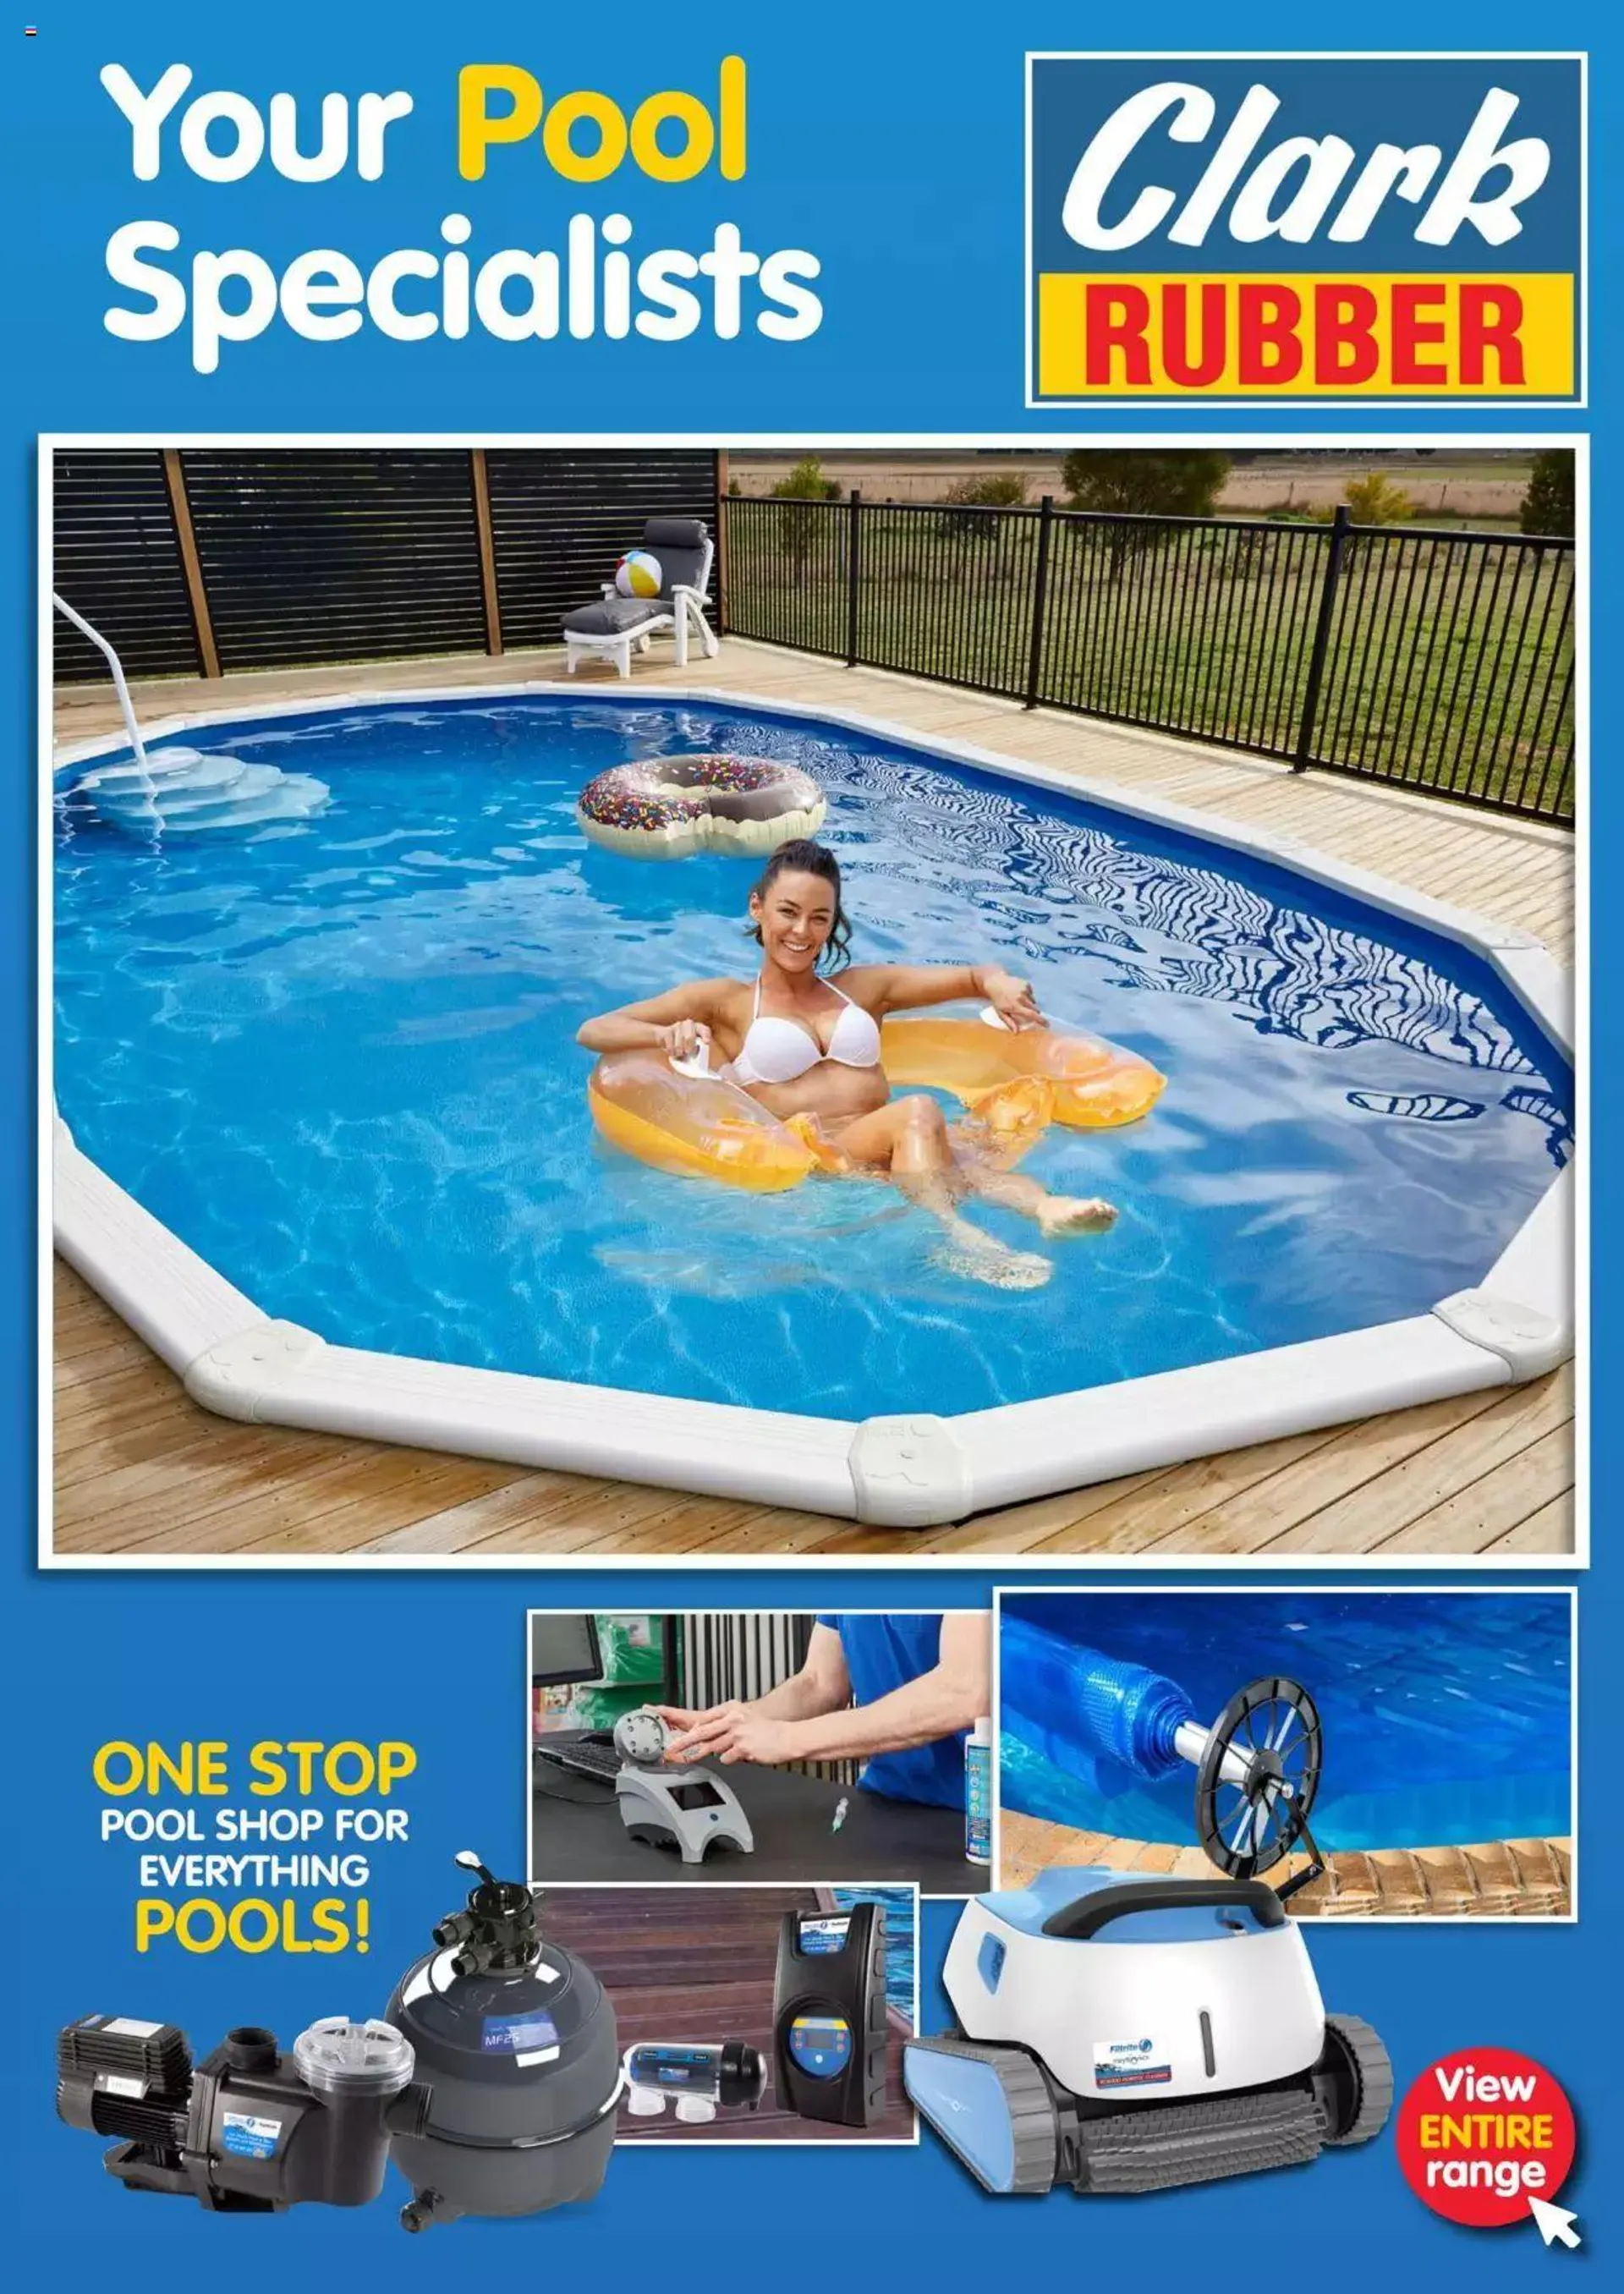 Clark Rubber - Your Pool Specialists - 0